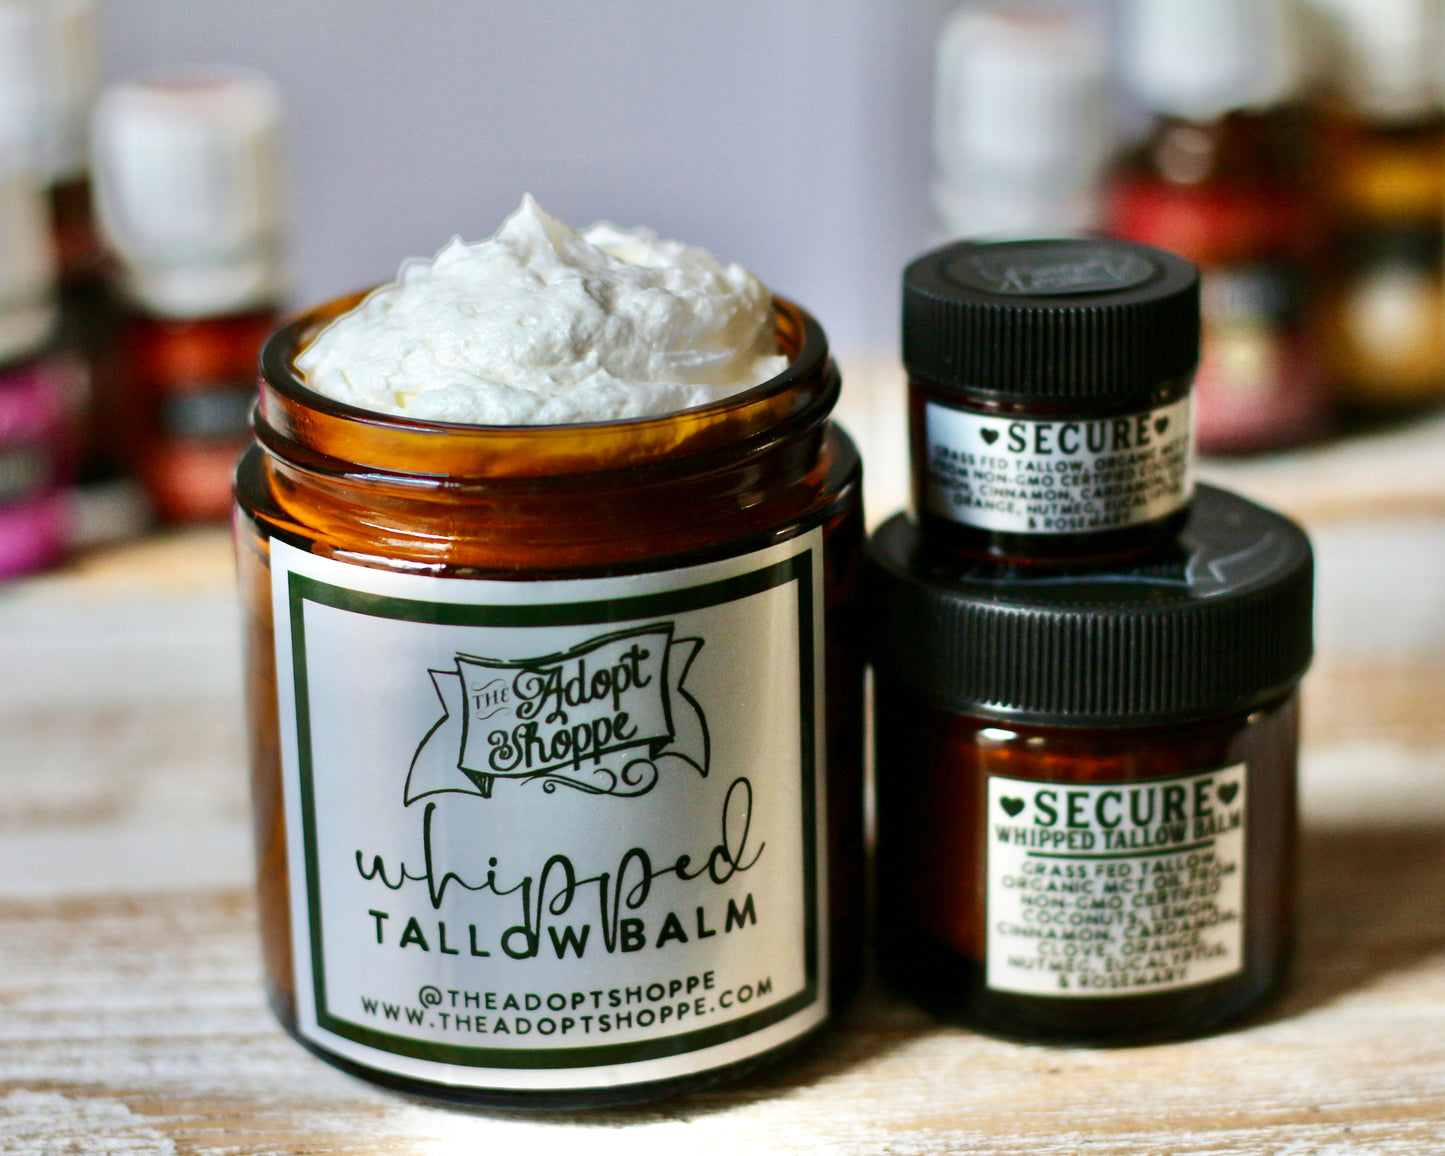 SECURE whipped tallow balm